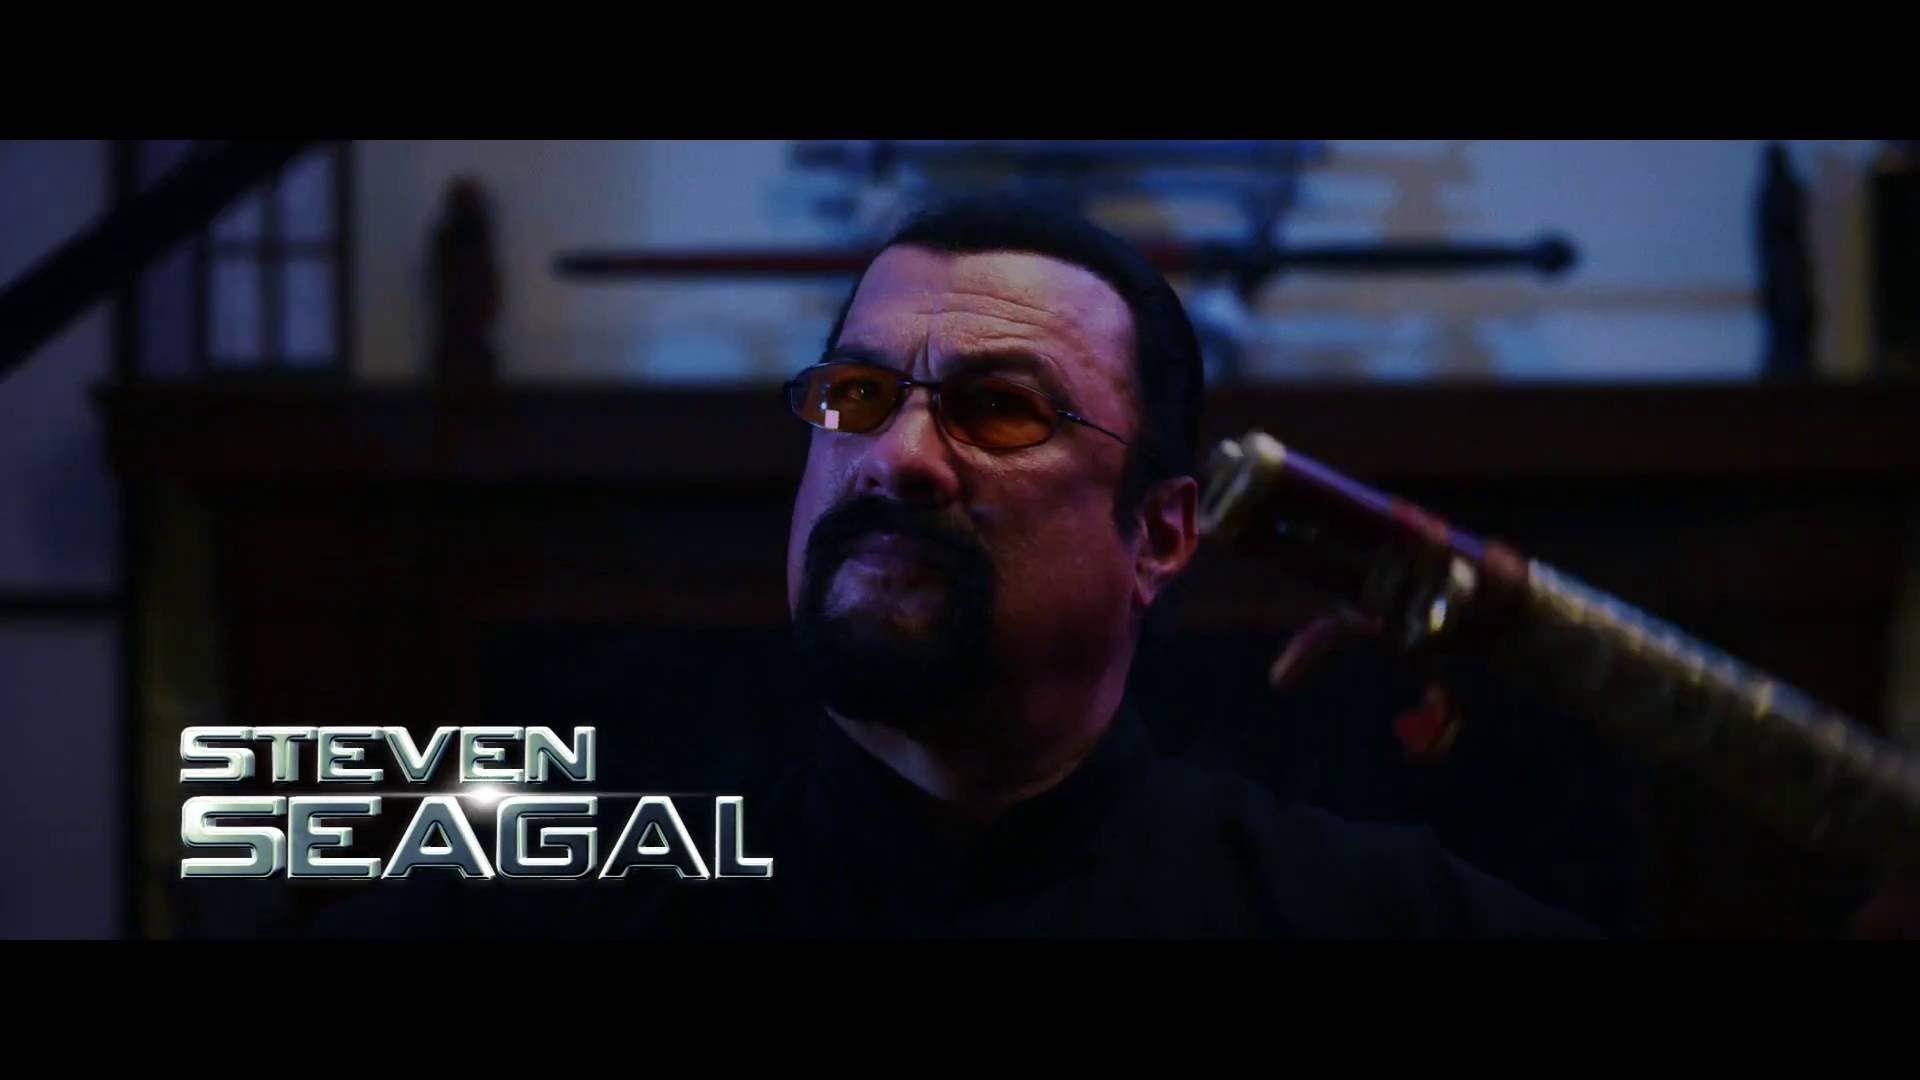 STEVEN SEAGAL THE PERFECT WEAPON (2016) Director Titus Paar